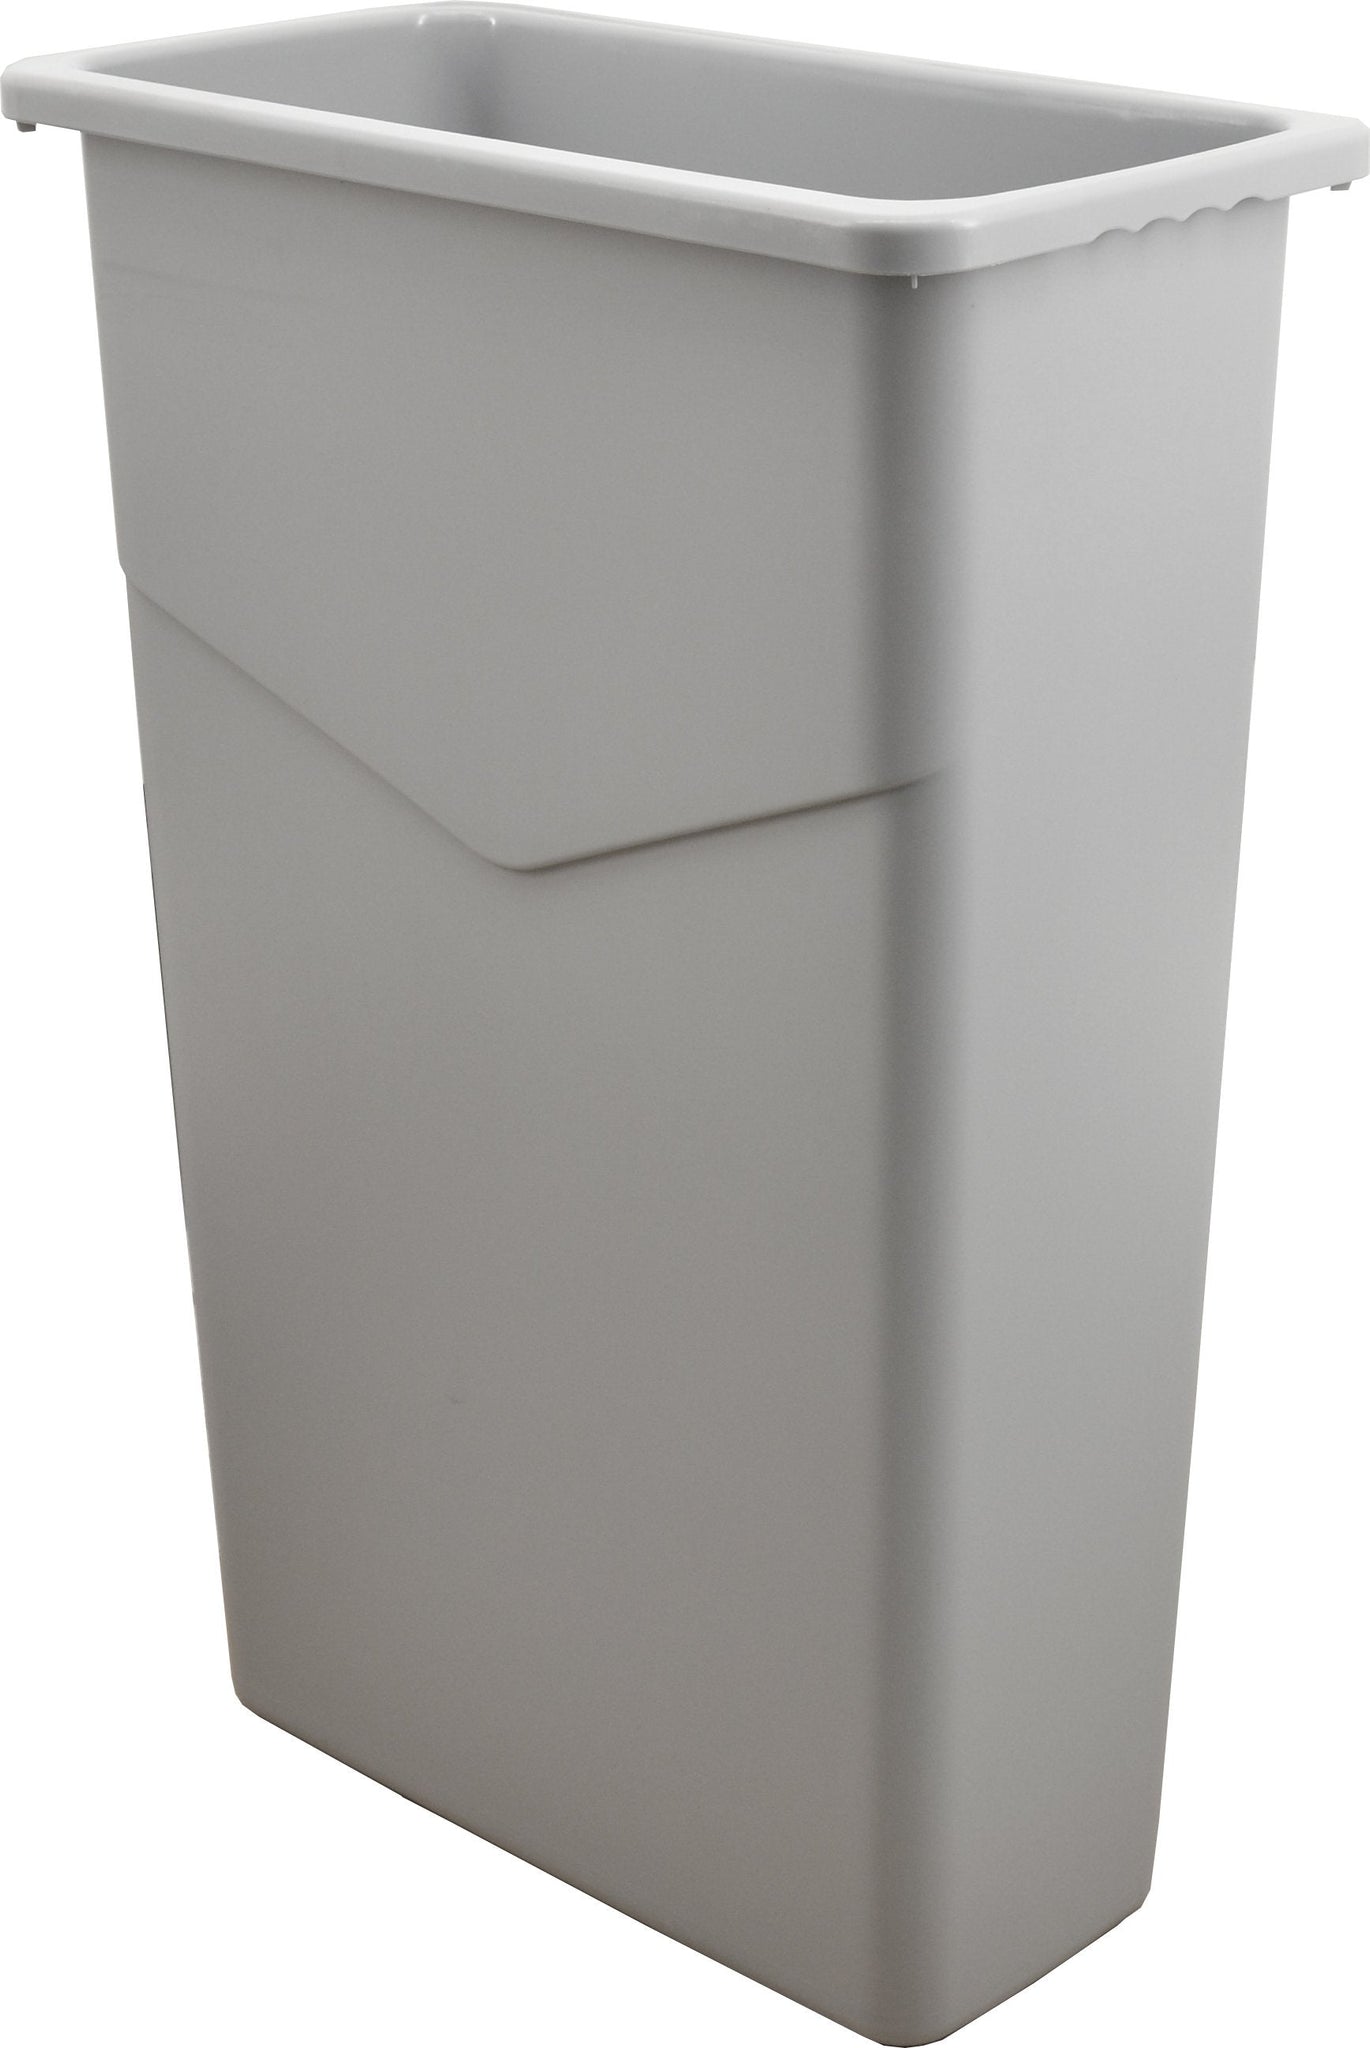 Omcan - Grey Recycling Trash Container, 2/cs - 43299